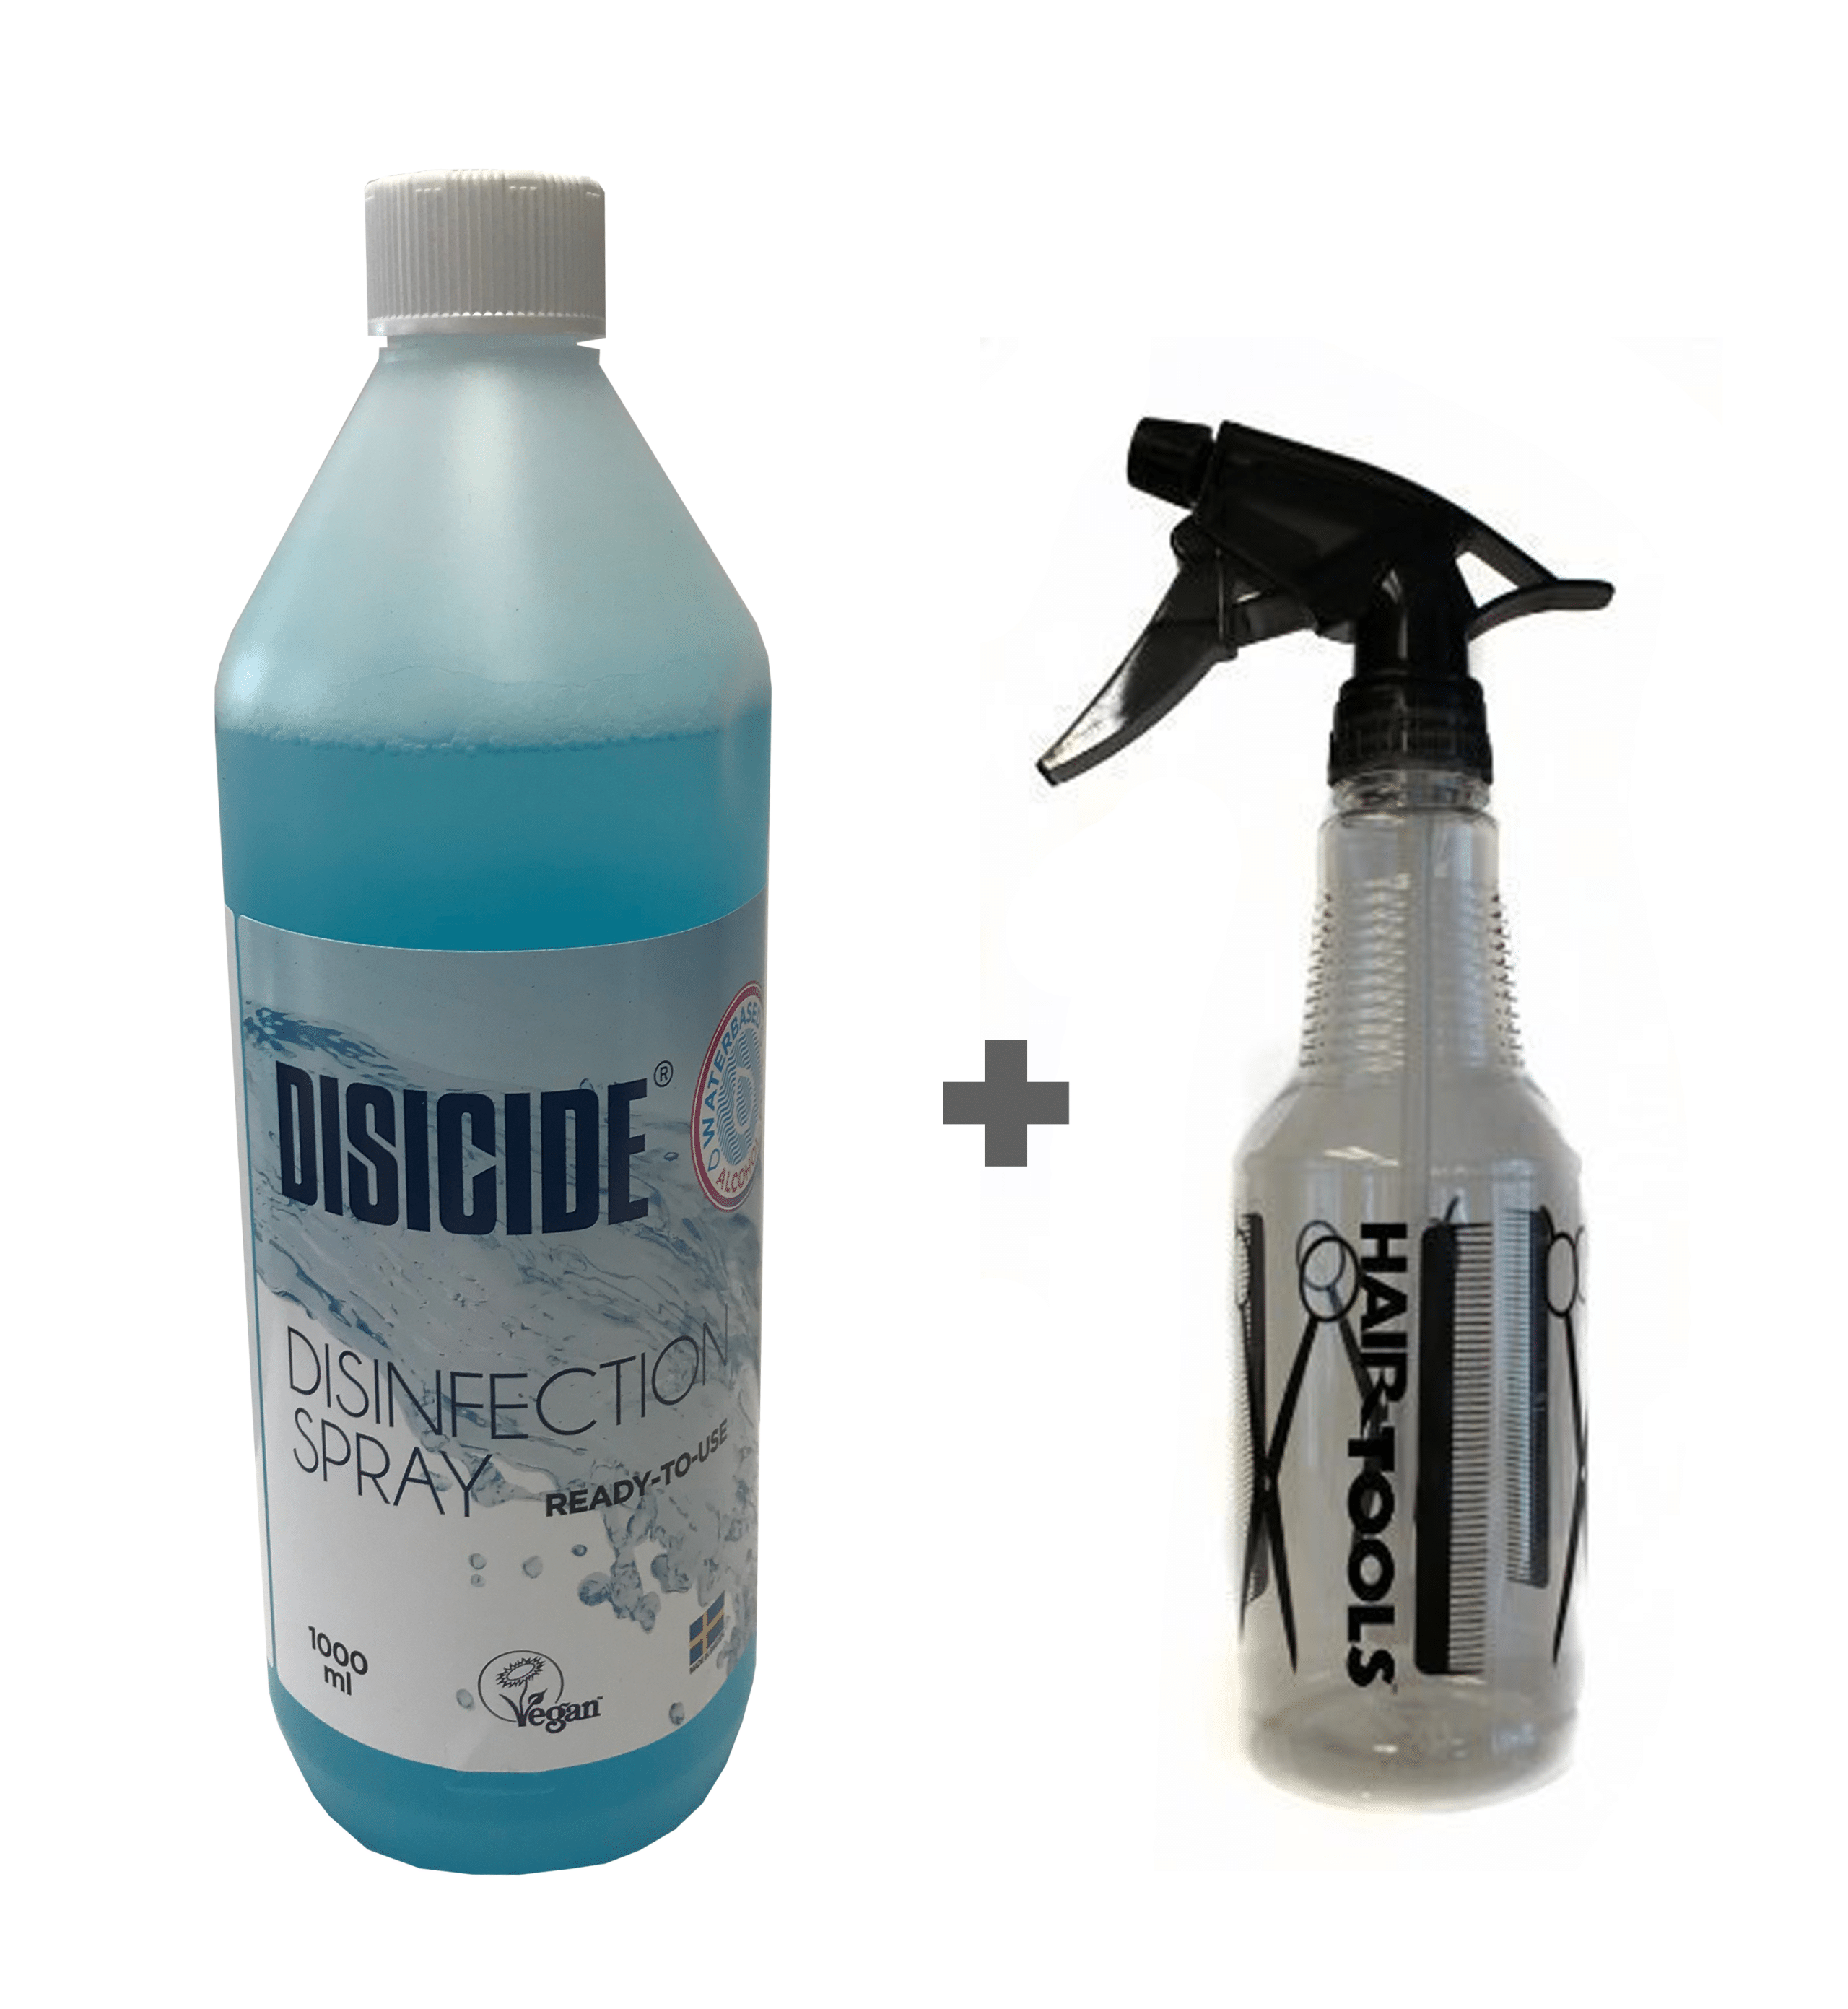 Disicide Disinfection 1000ml Plus FREE Spray Bottle